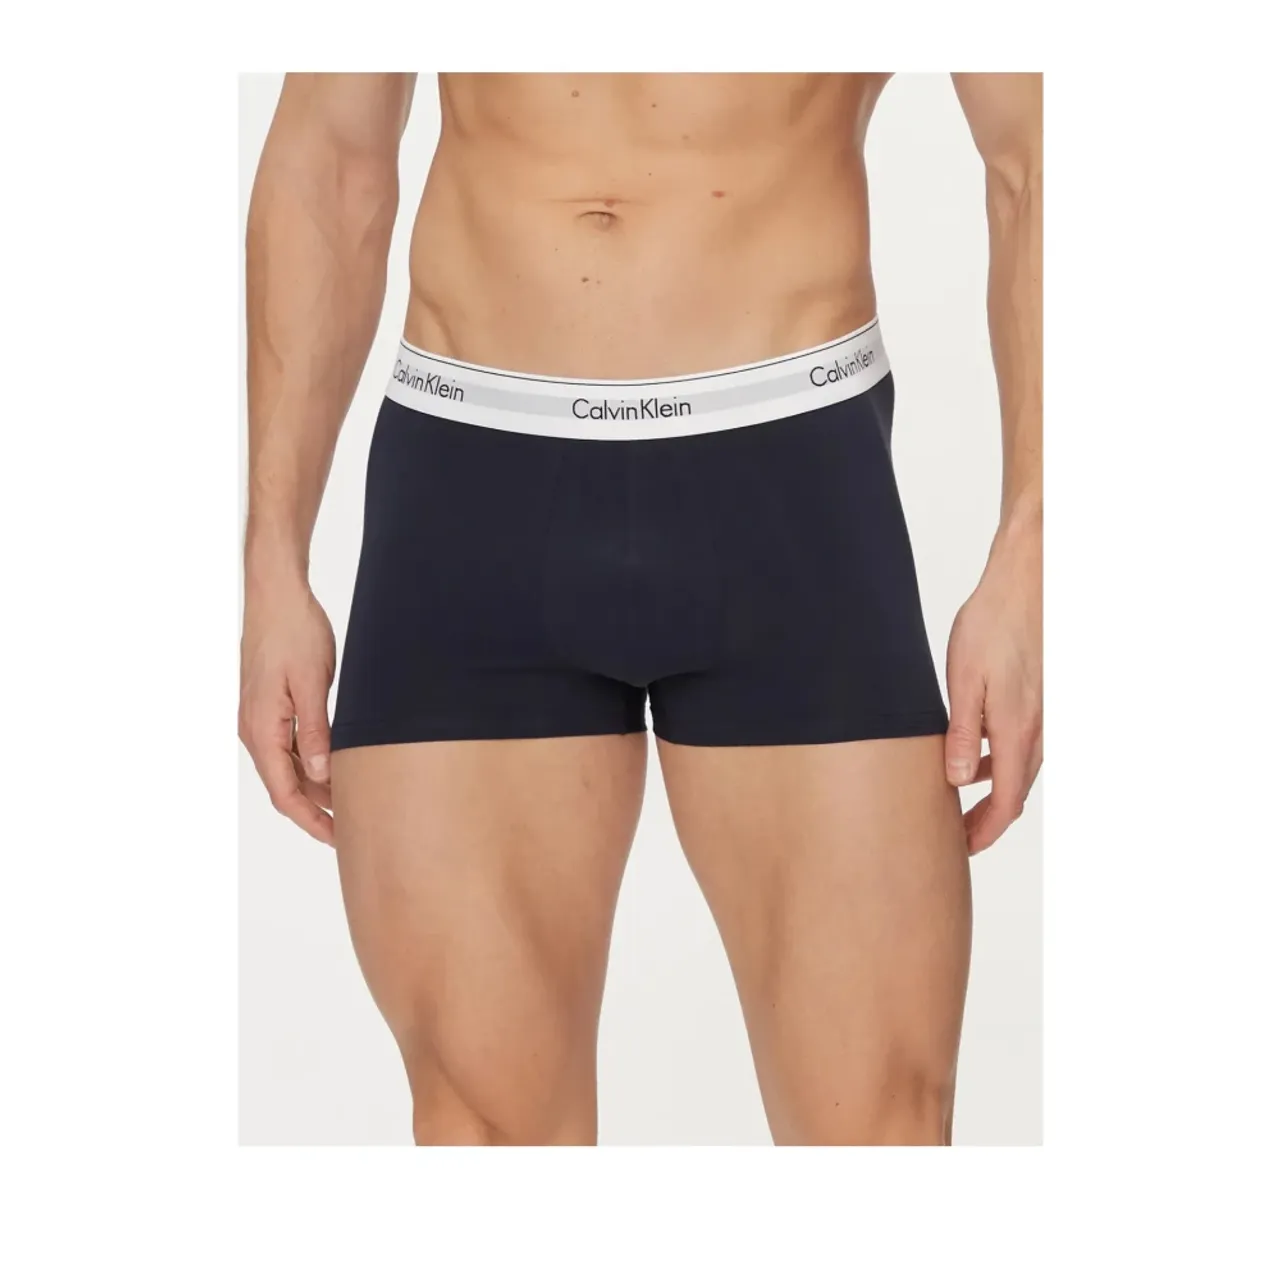 Multicolor Stretch Boxers Pack - Shorty Calvin Klein